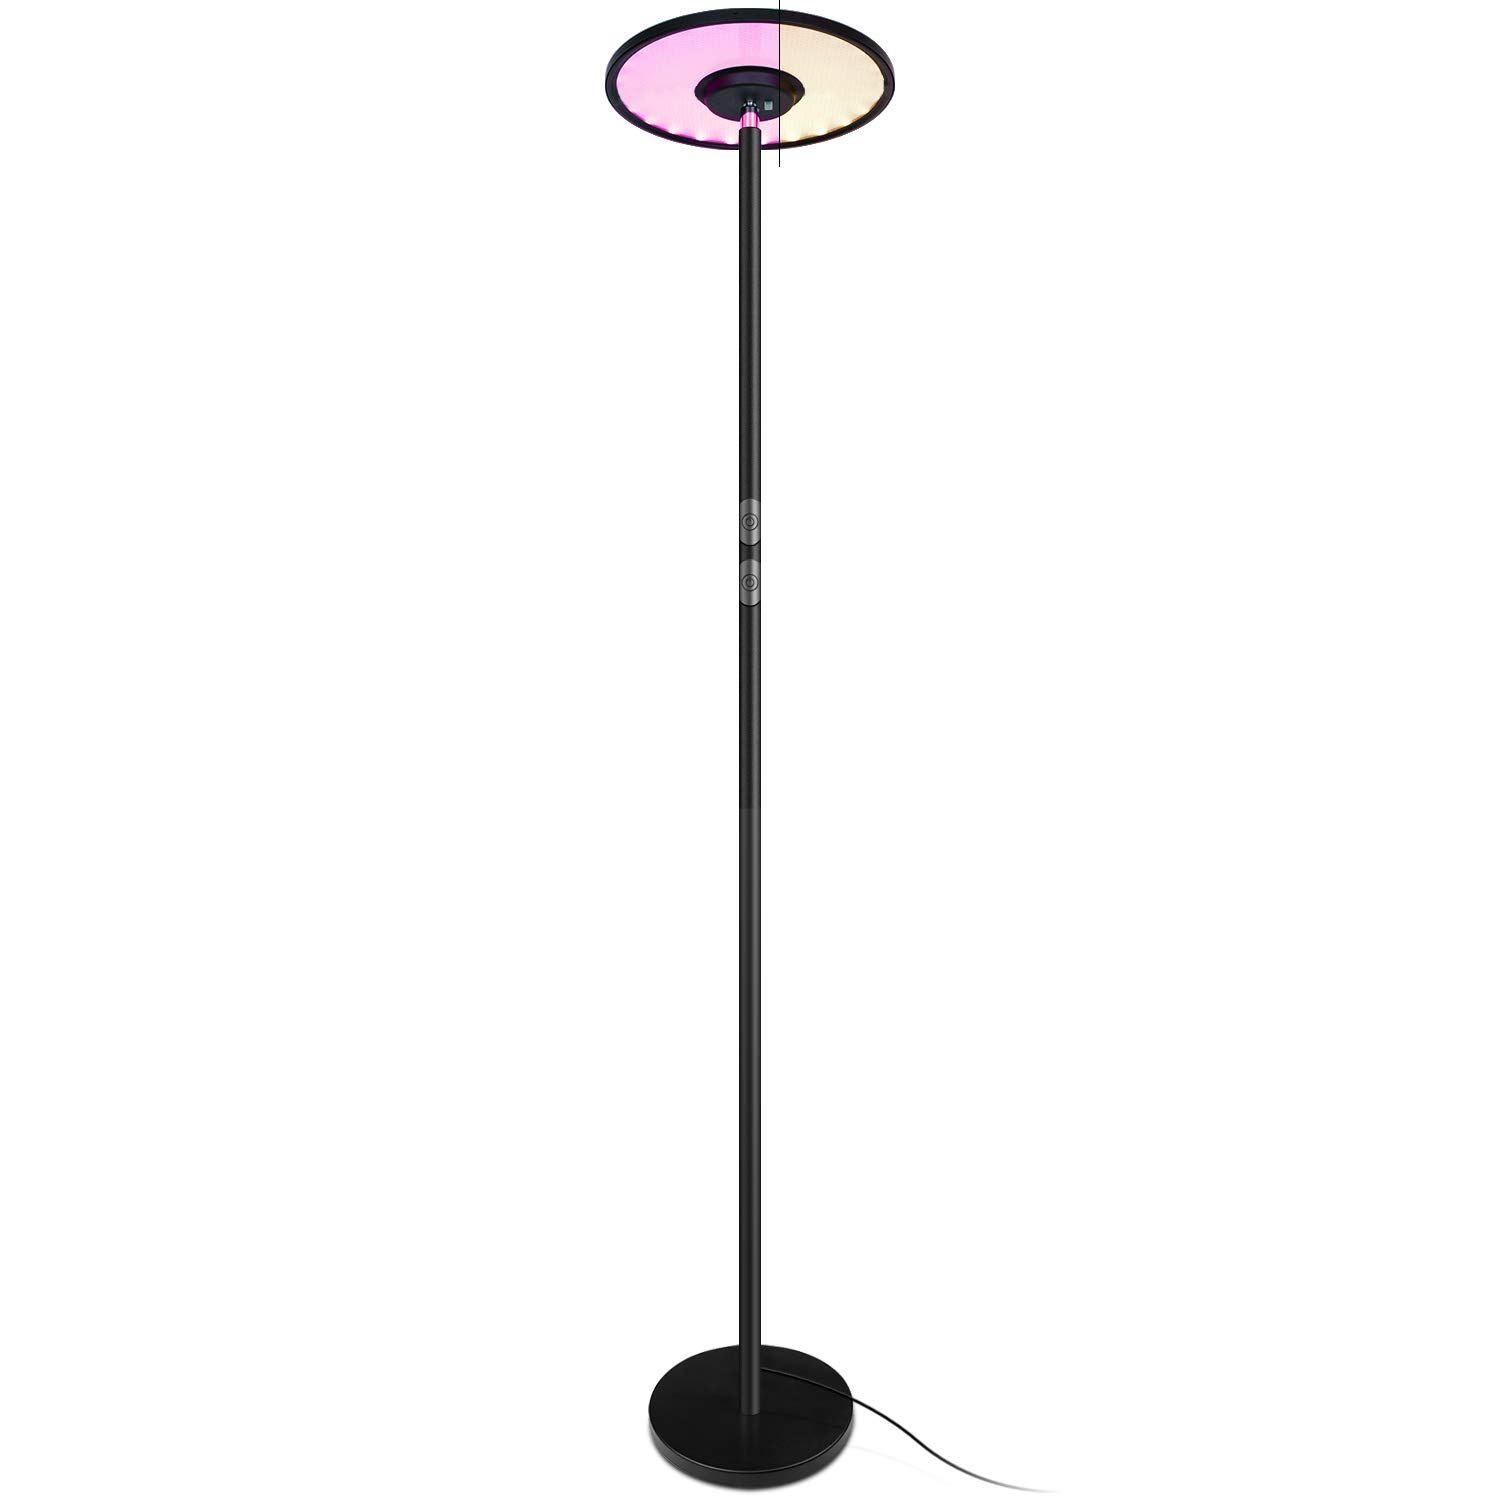 Frenchmay Dimmable Led Torchiere Floor Lamp Adjustable Floor Lamp Reading Lamp With Colored Lights 24w 5000k Daylight Brightness 200w Equivalent for proportions 1500 X 1500